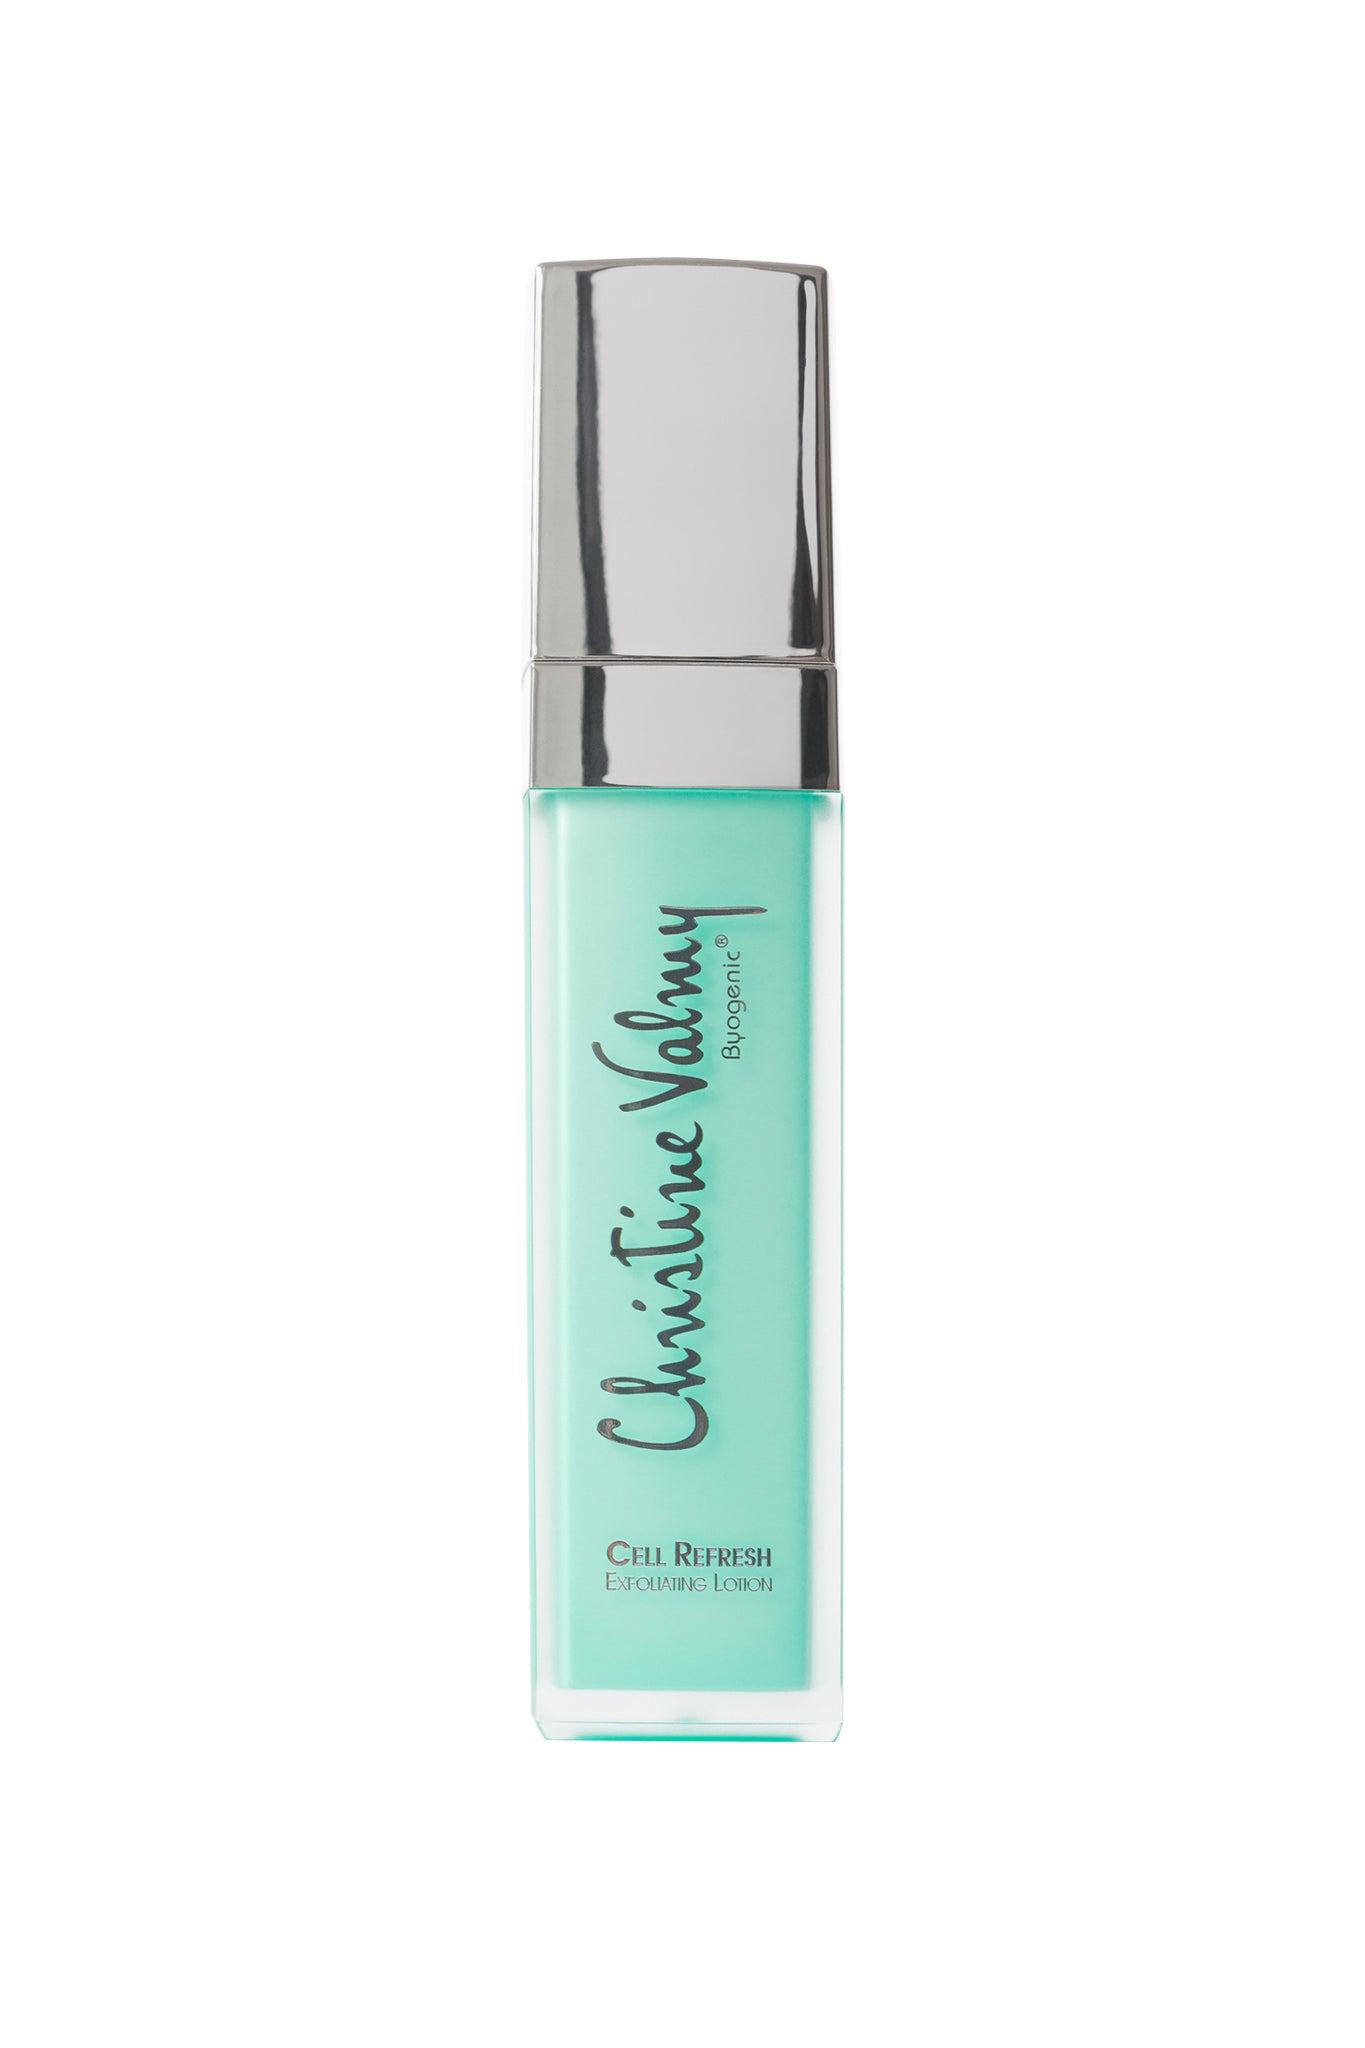 Christine Valmy Cell Refresh exfoliating lotion, for all skin types.